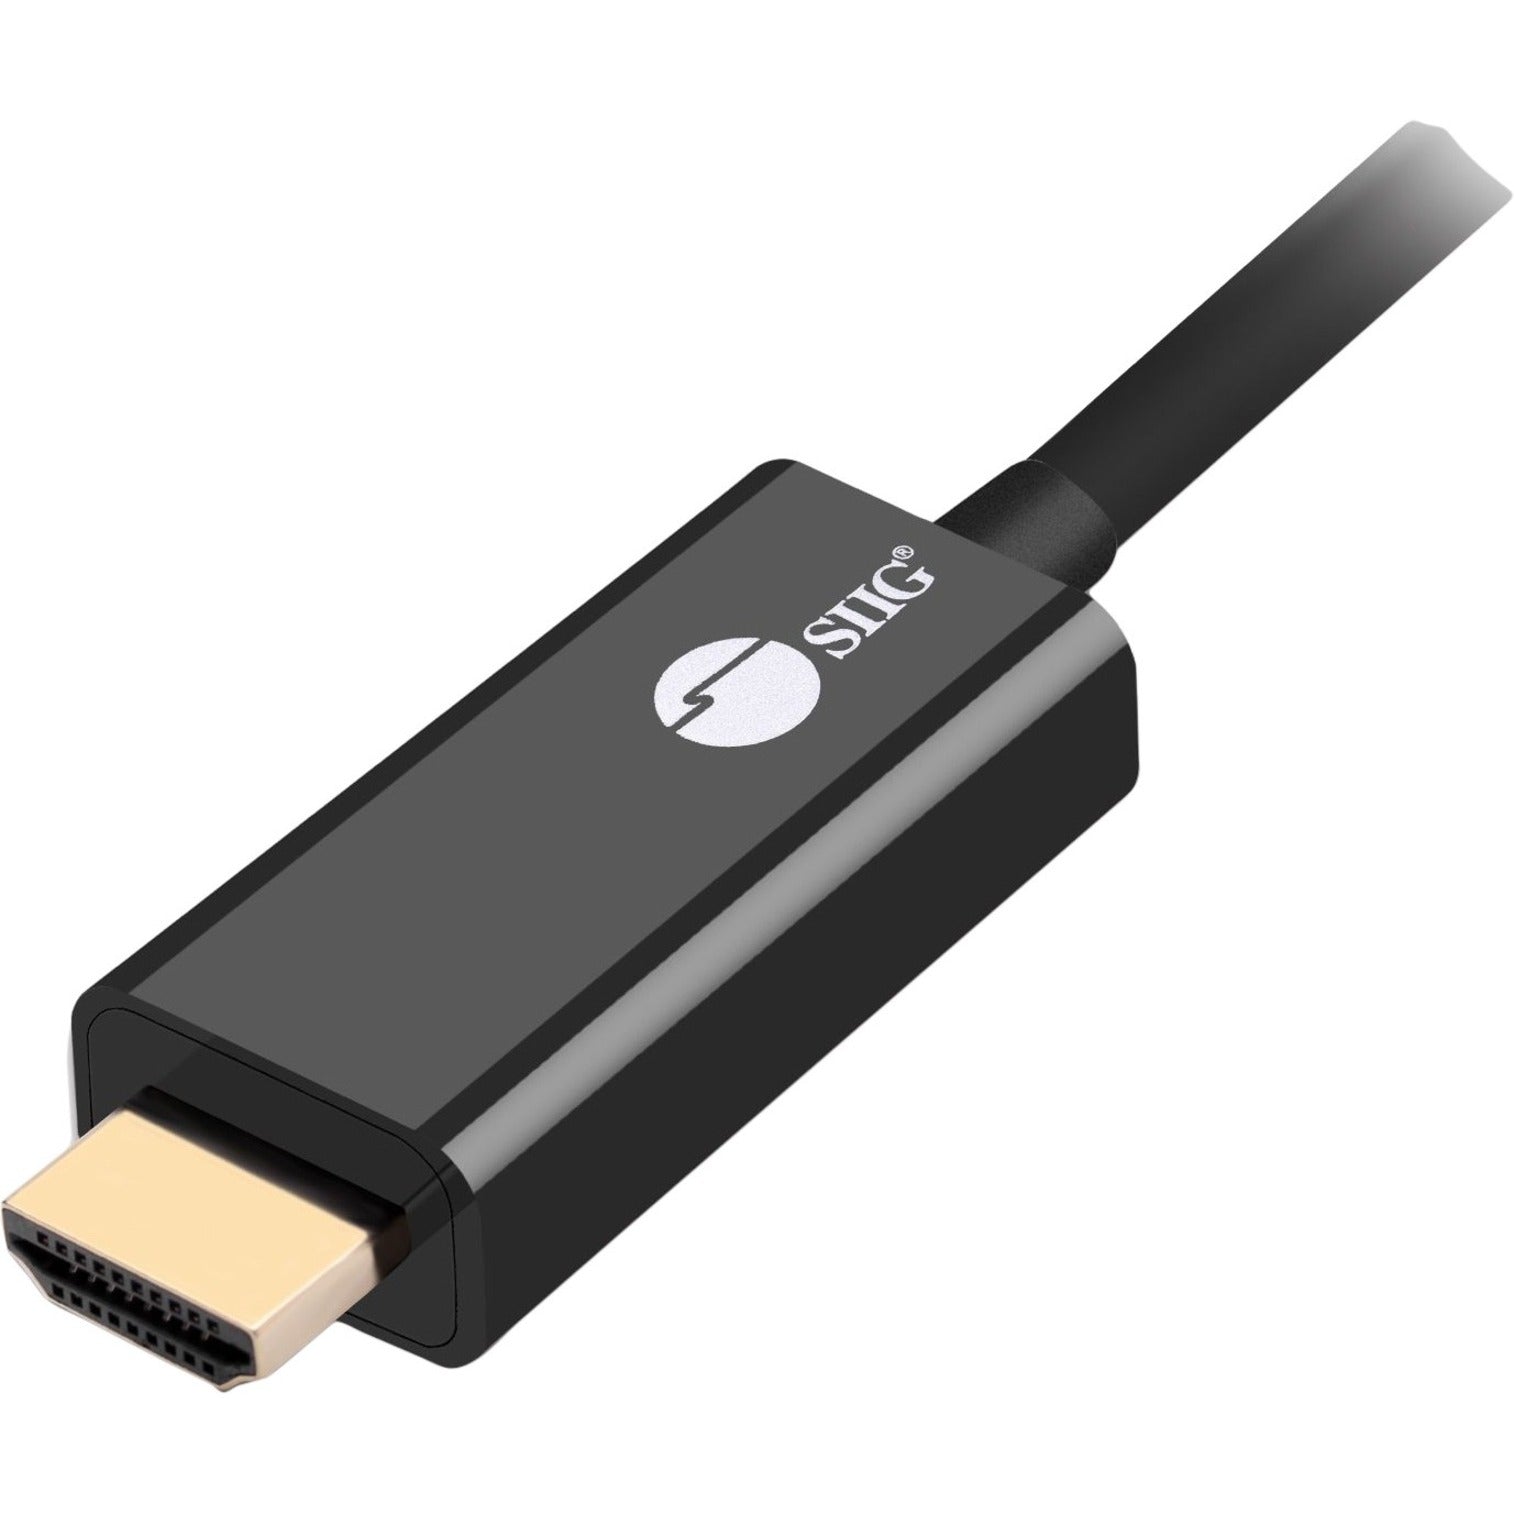 SIIG CB-DP1R12-S1 DisplayPort 1.2 to HDMI 10ft Cable 4K/30Hz, Plug & Play, Gold-Plated Connectors, 2-Year Warranty